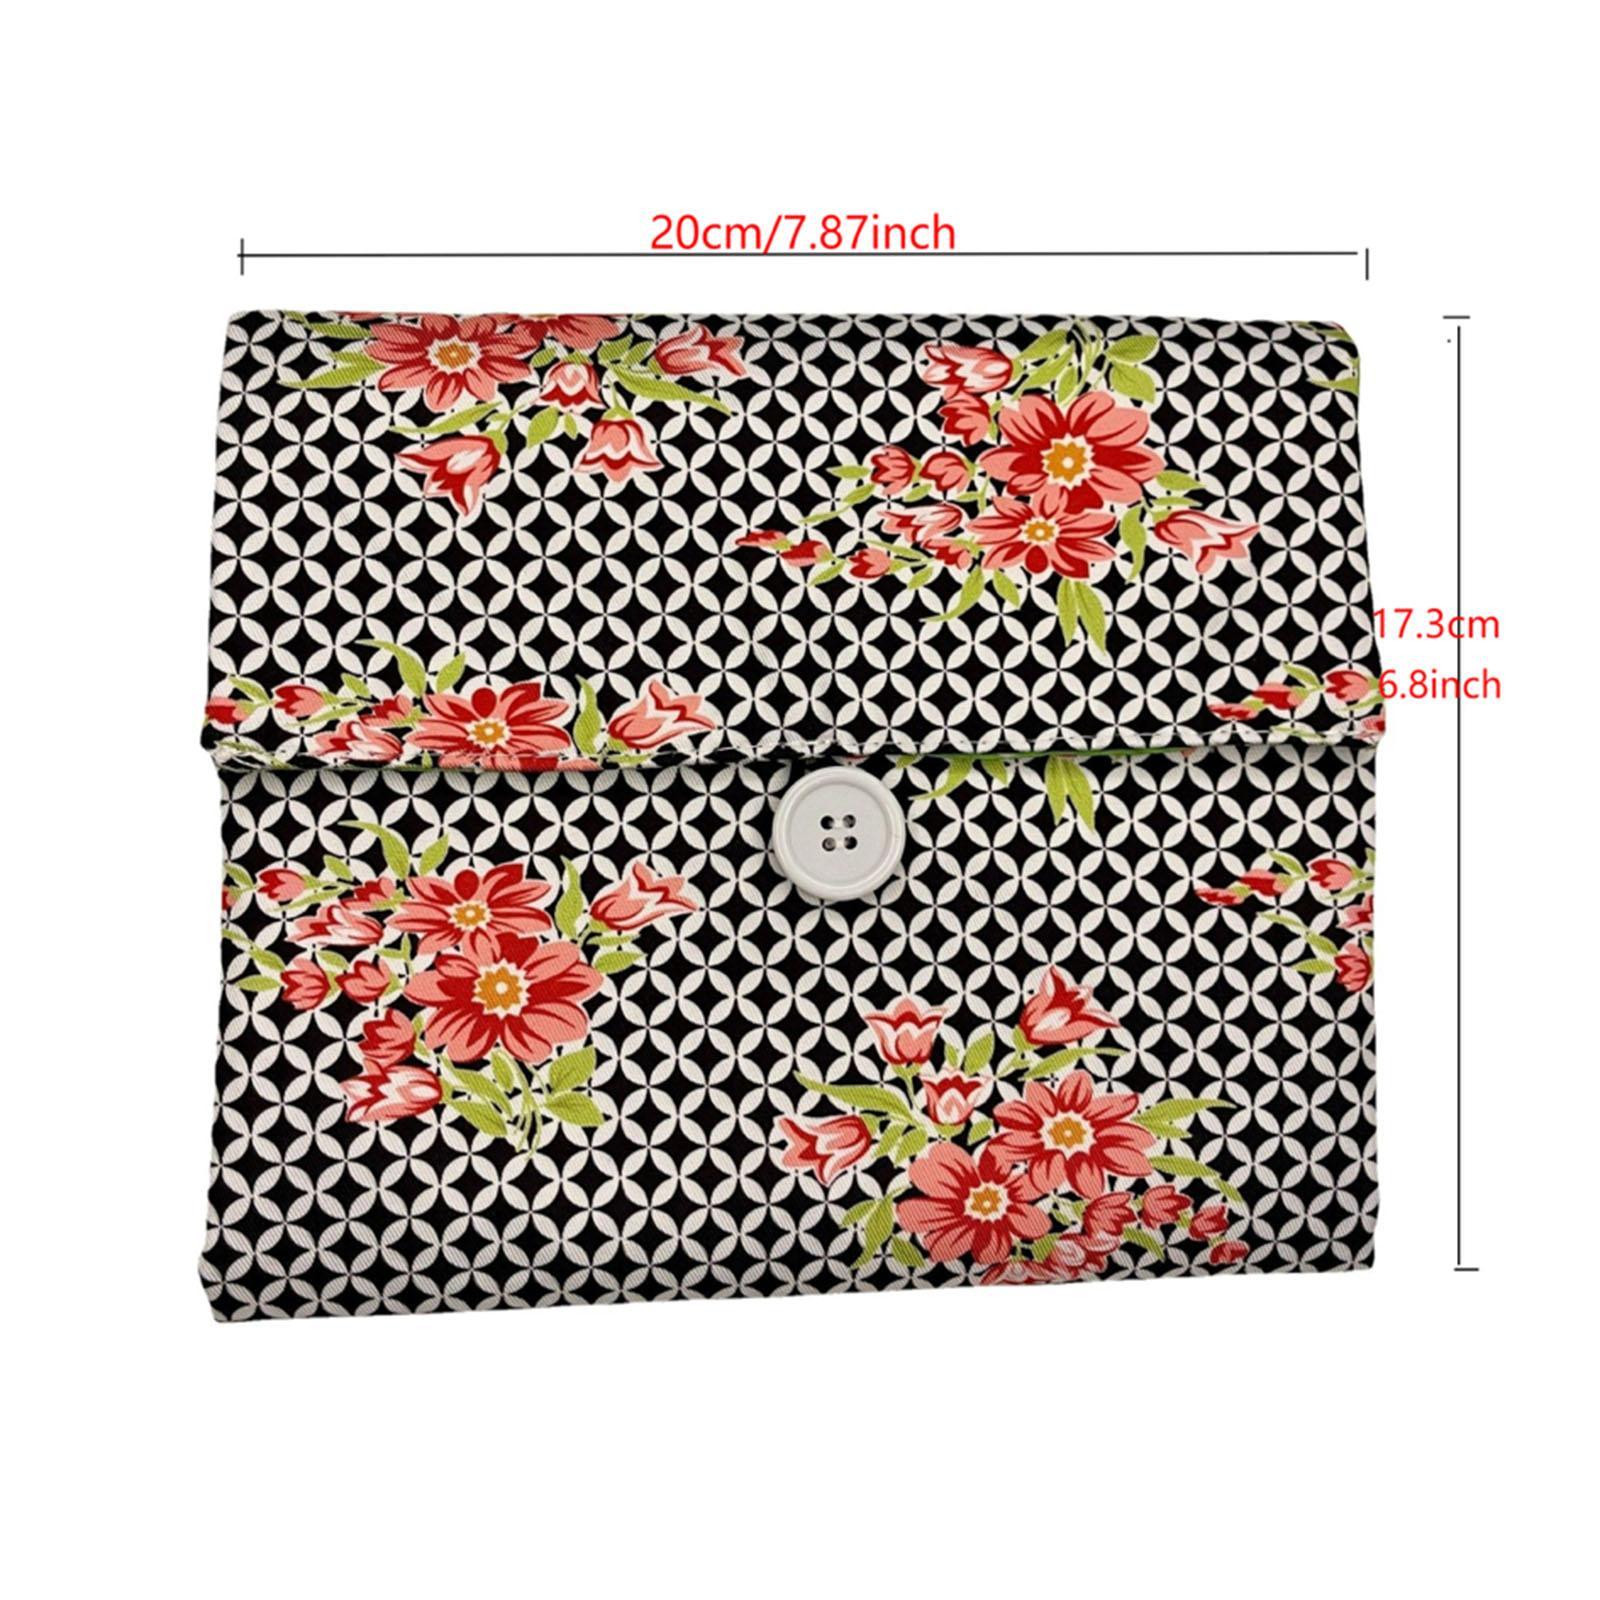 Cosmetic Bag fashion Toiletry Bag Unique Gift Makeup Case for Travel